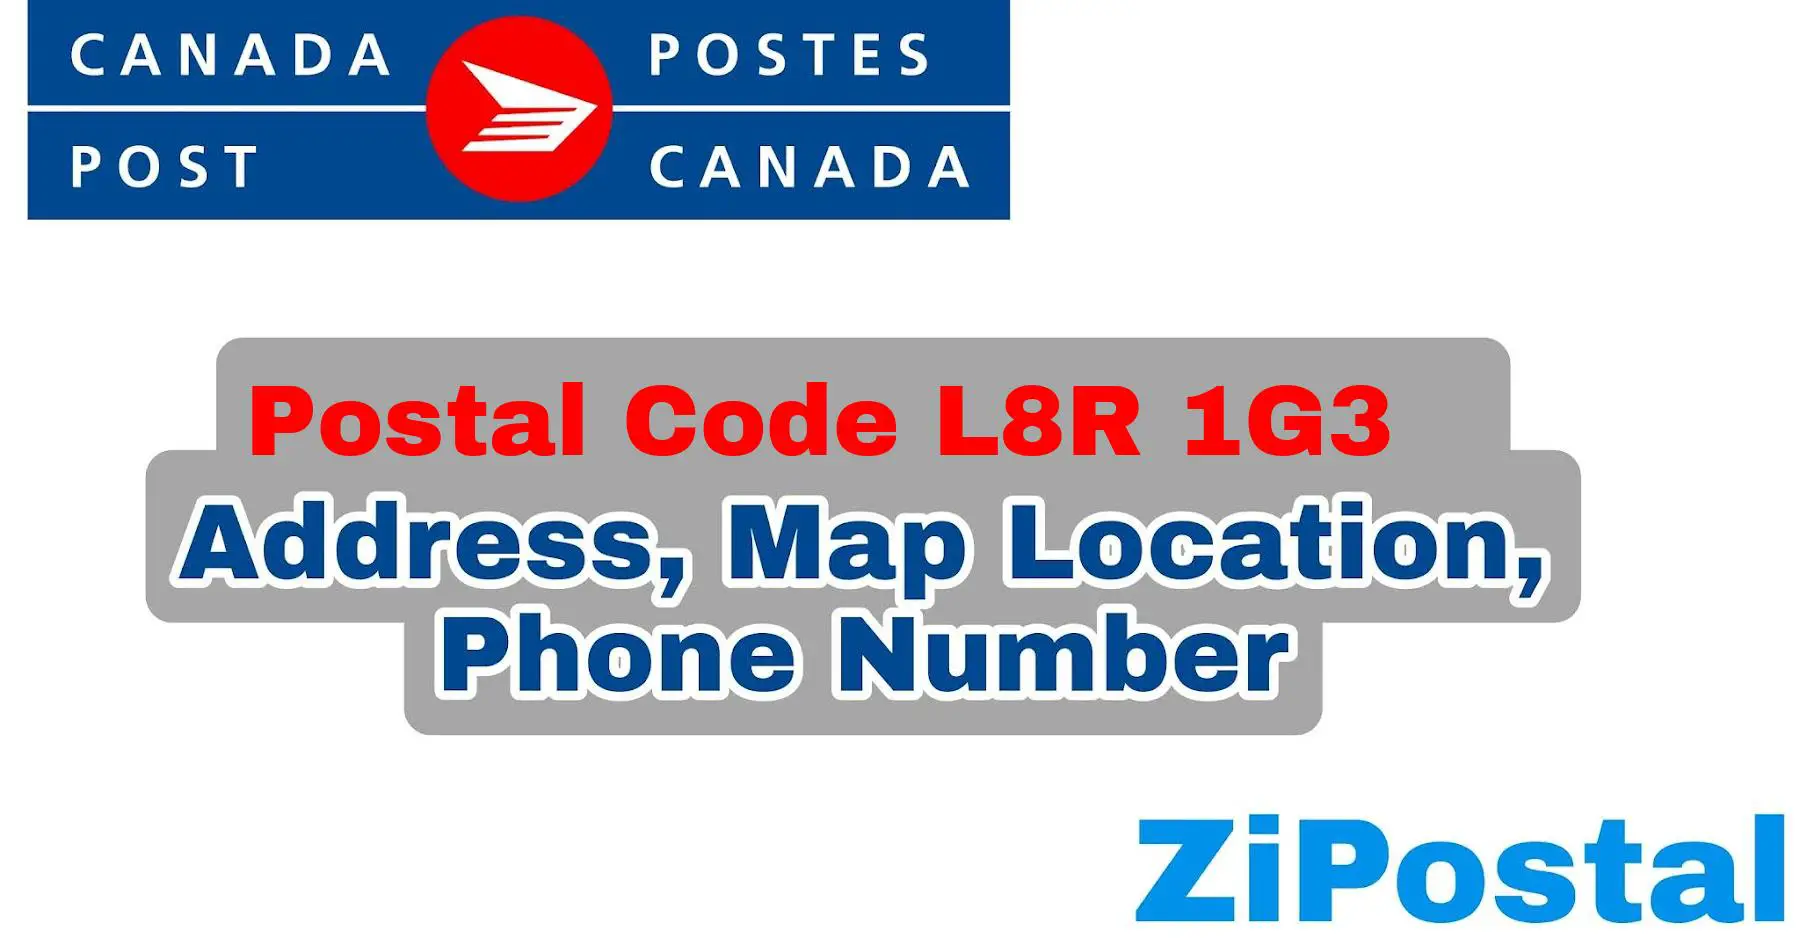 Postal Code L8R 1G3 Address Map Location and Phone Number